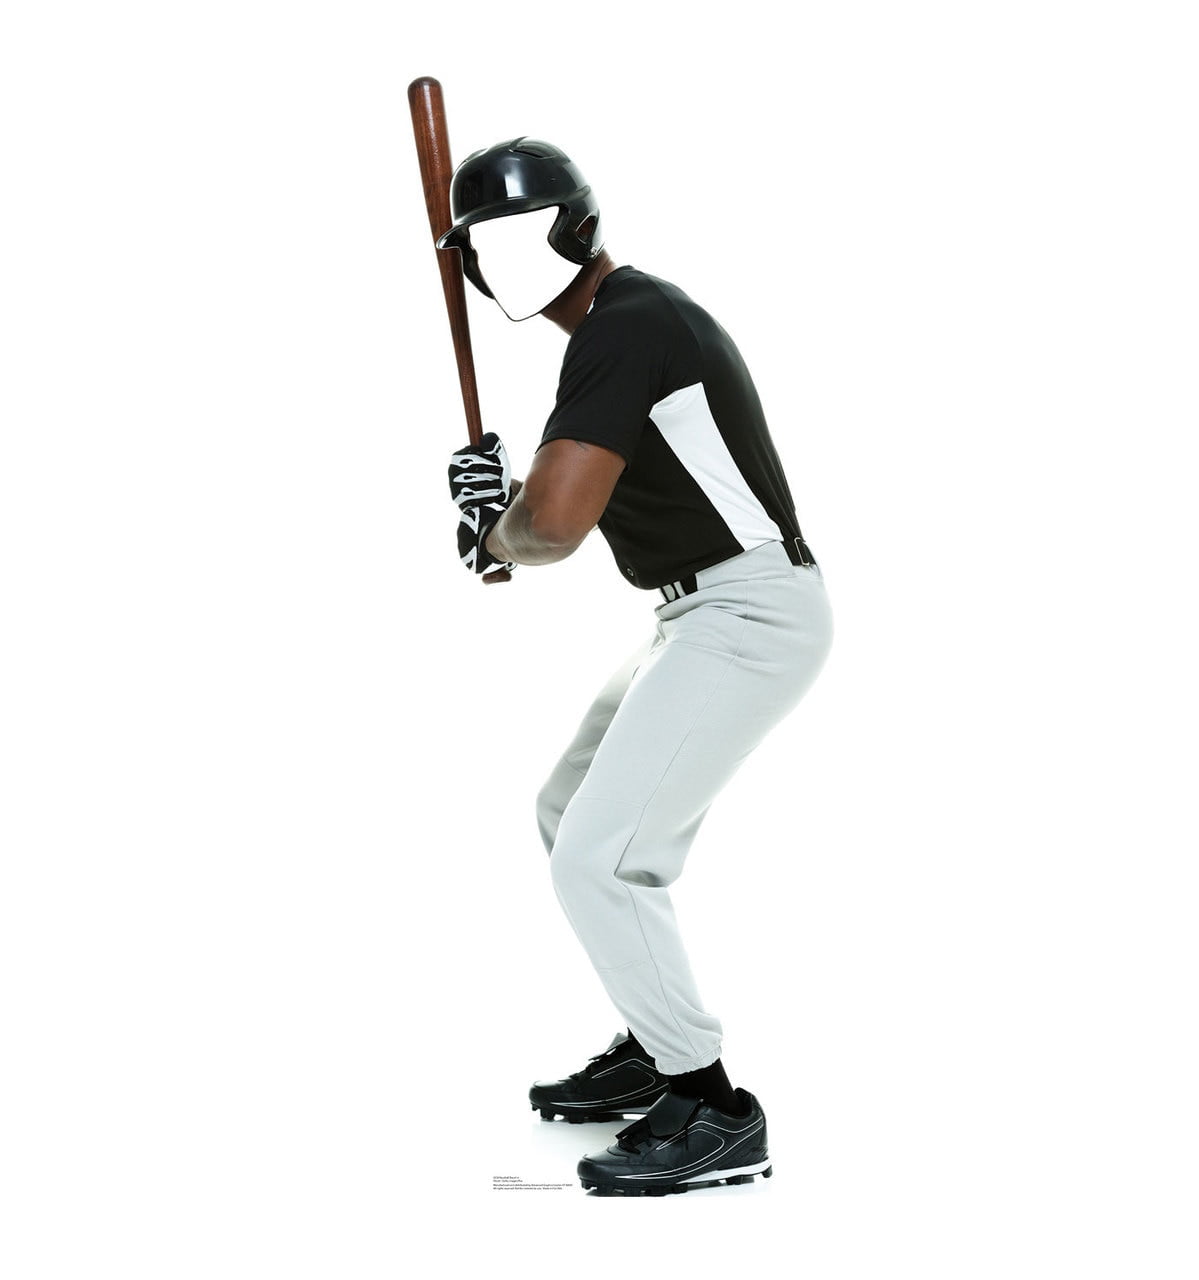 2628 68 X 26 In. Baseball Player Stand-in